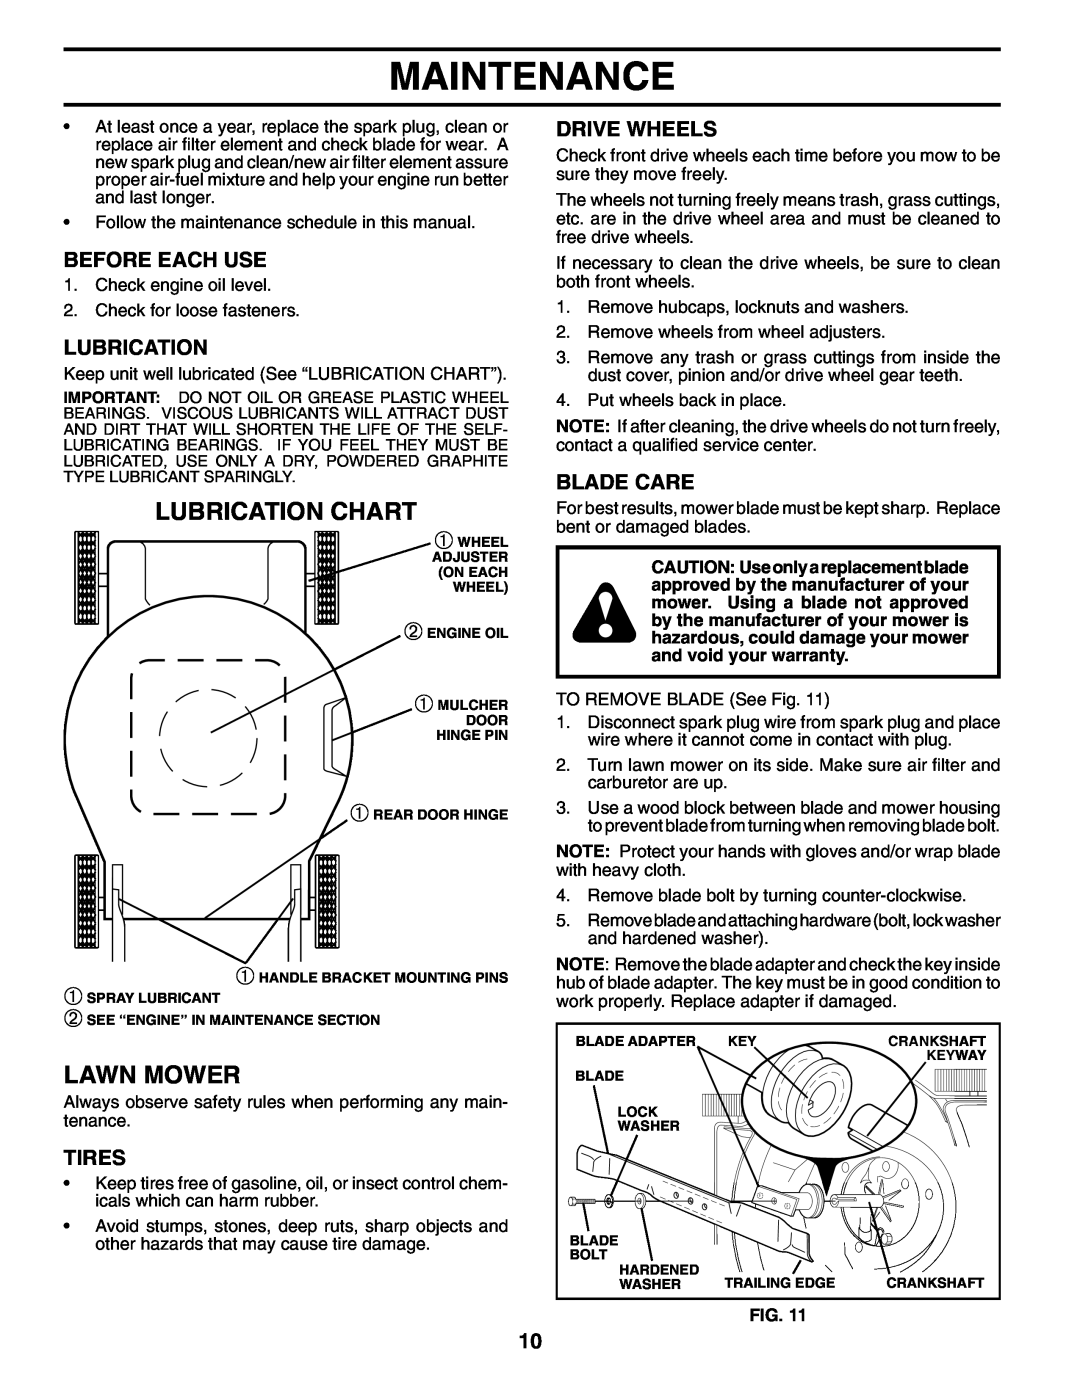 Husqvarna 5521 CHV 96143000106 manual Lubrication Chart, Lawn Mower, Before Each Use, Tires, Drive Wheels, Blade Care, Fig 